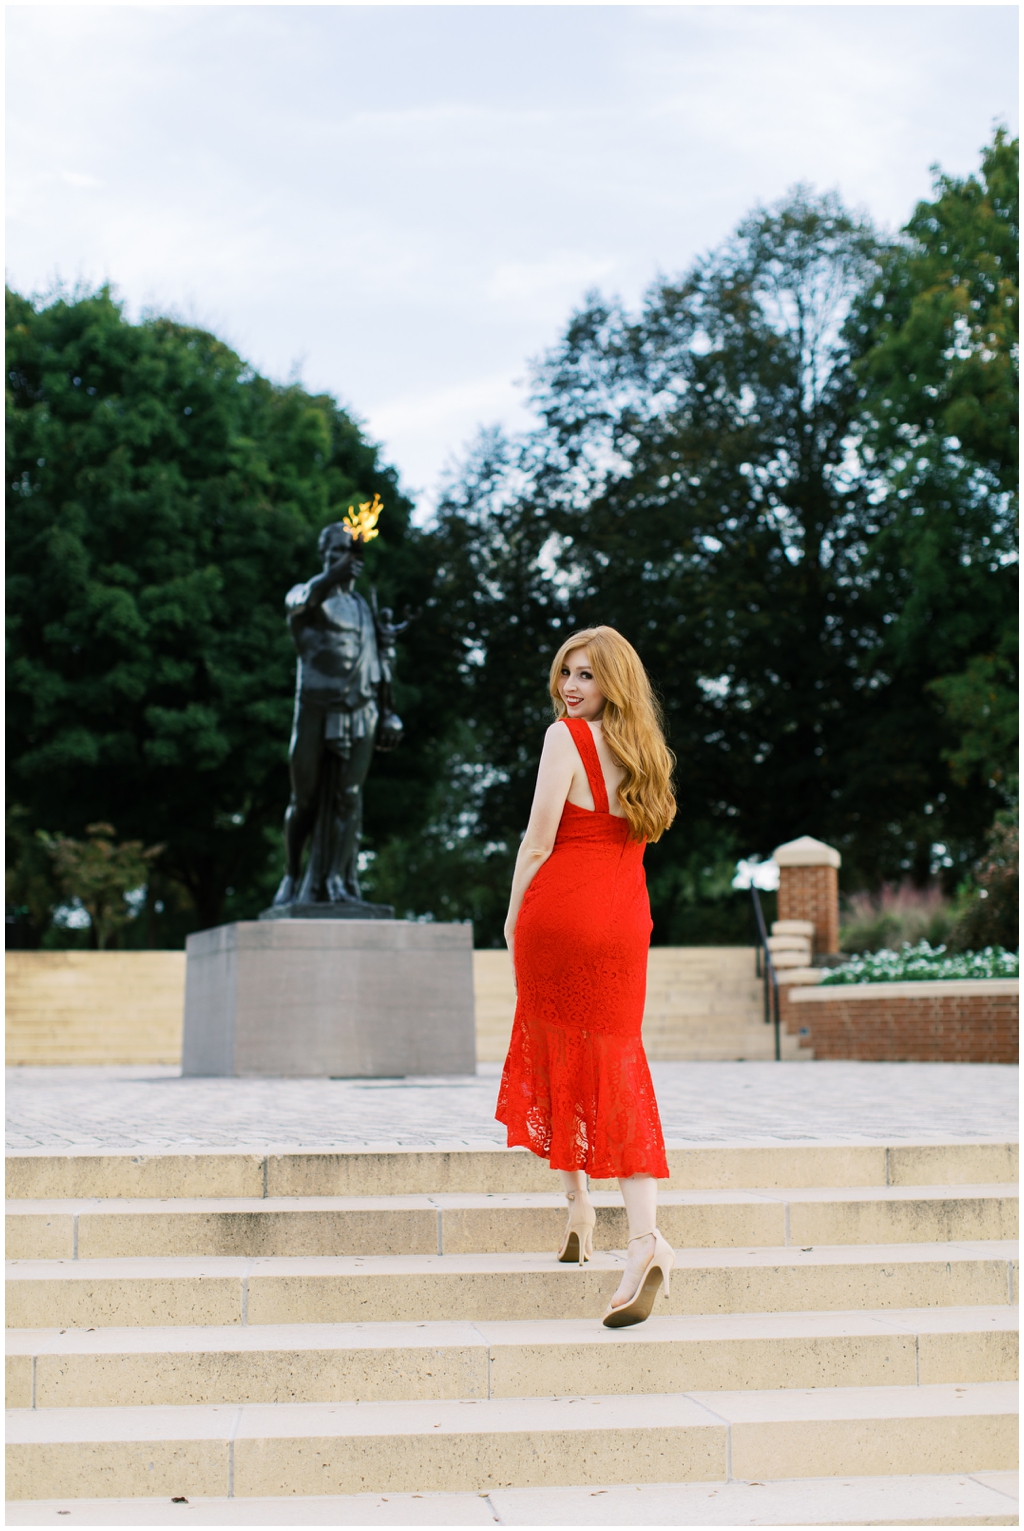 Glamorous senior graduate portraits on the campus of University of Tennessee. Photos by Holly Michon Photography.